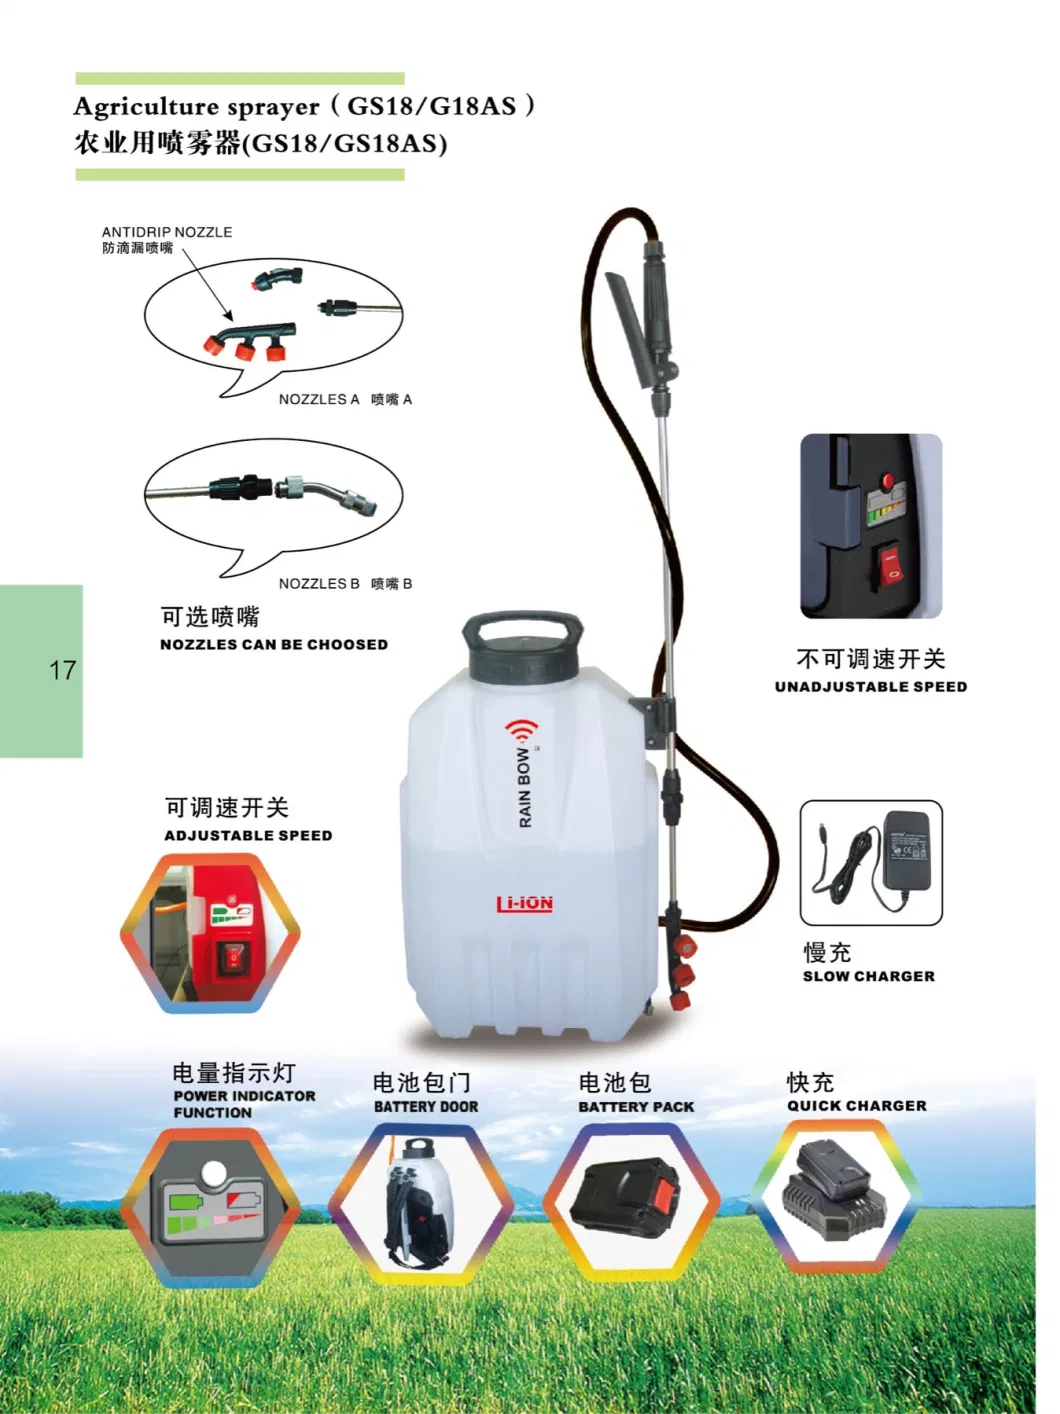 Farmland Quick Charger Good Quality 10L/20L Agricultural Knapsack/Backpack Battery Electric Type Power Sprayer